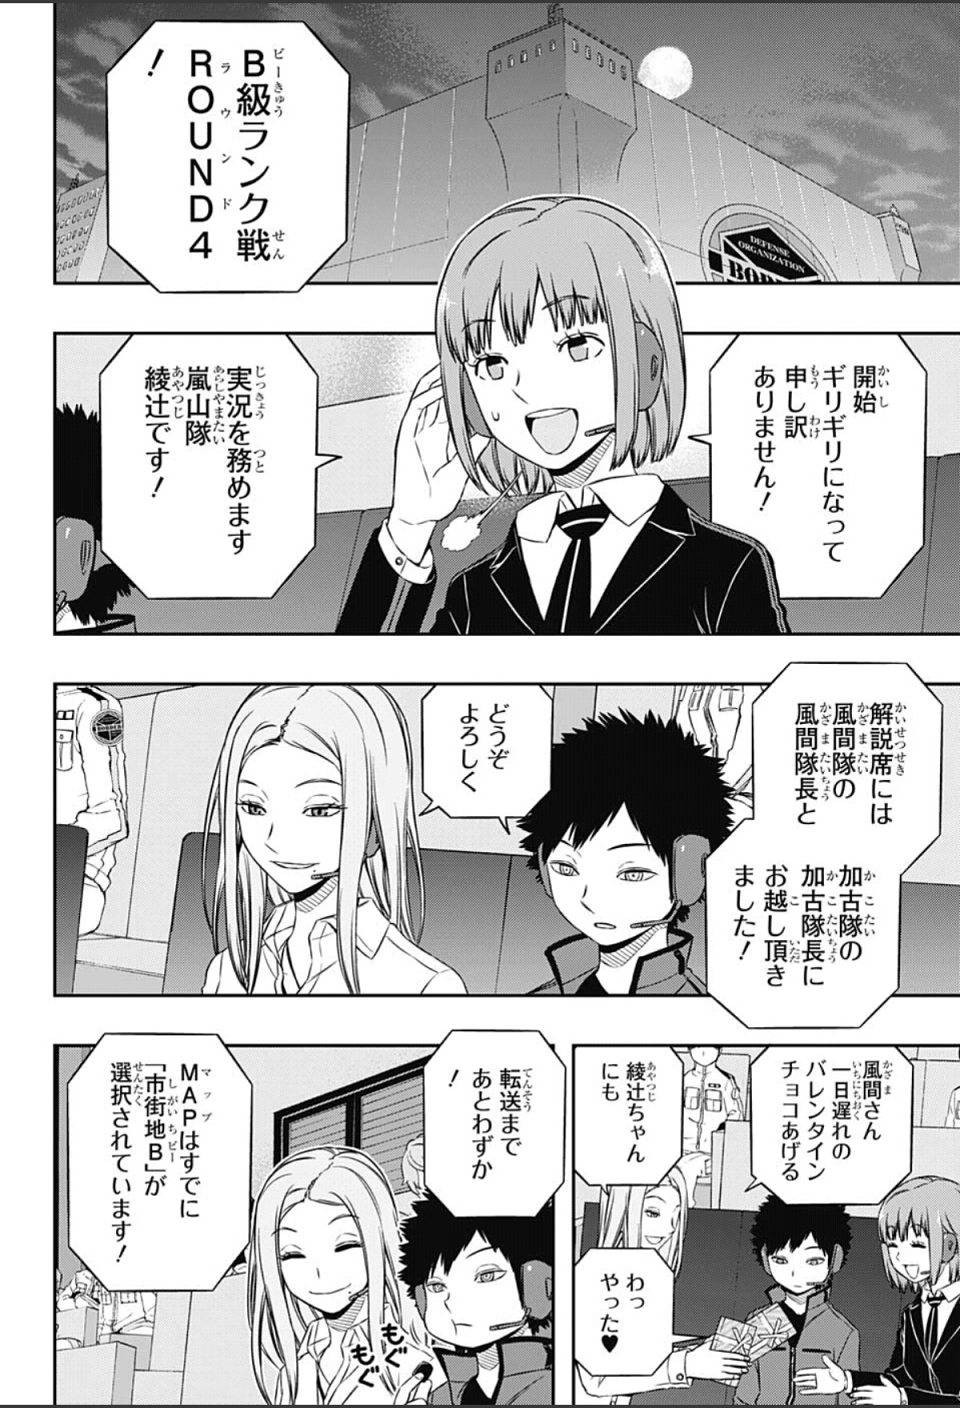 World Trigger - Chapter 110 - Page 16